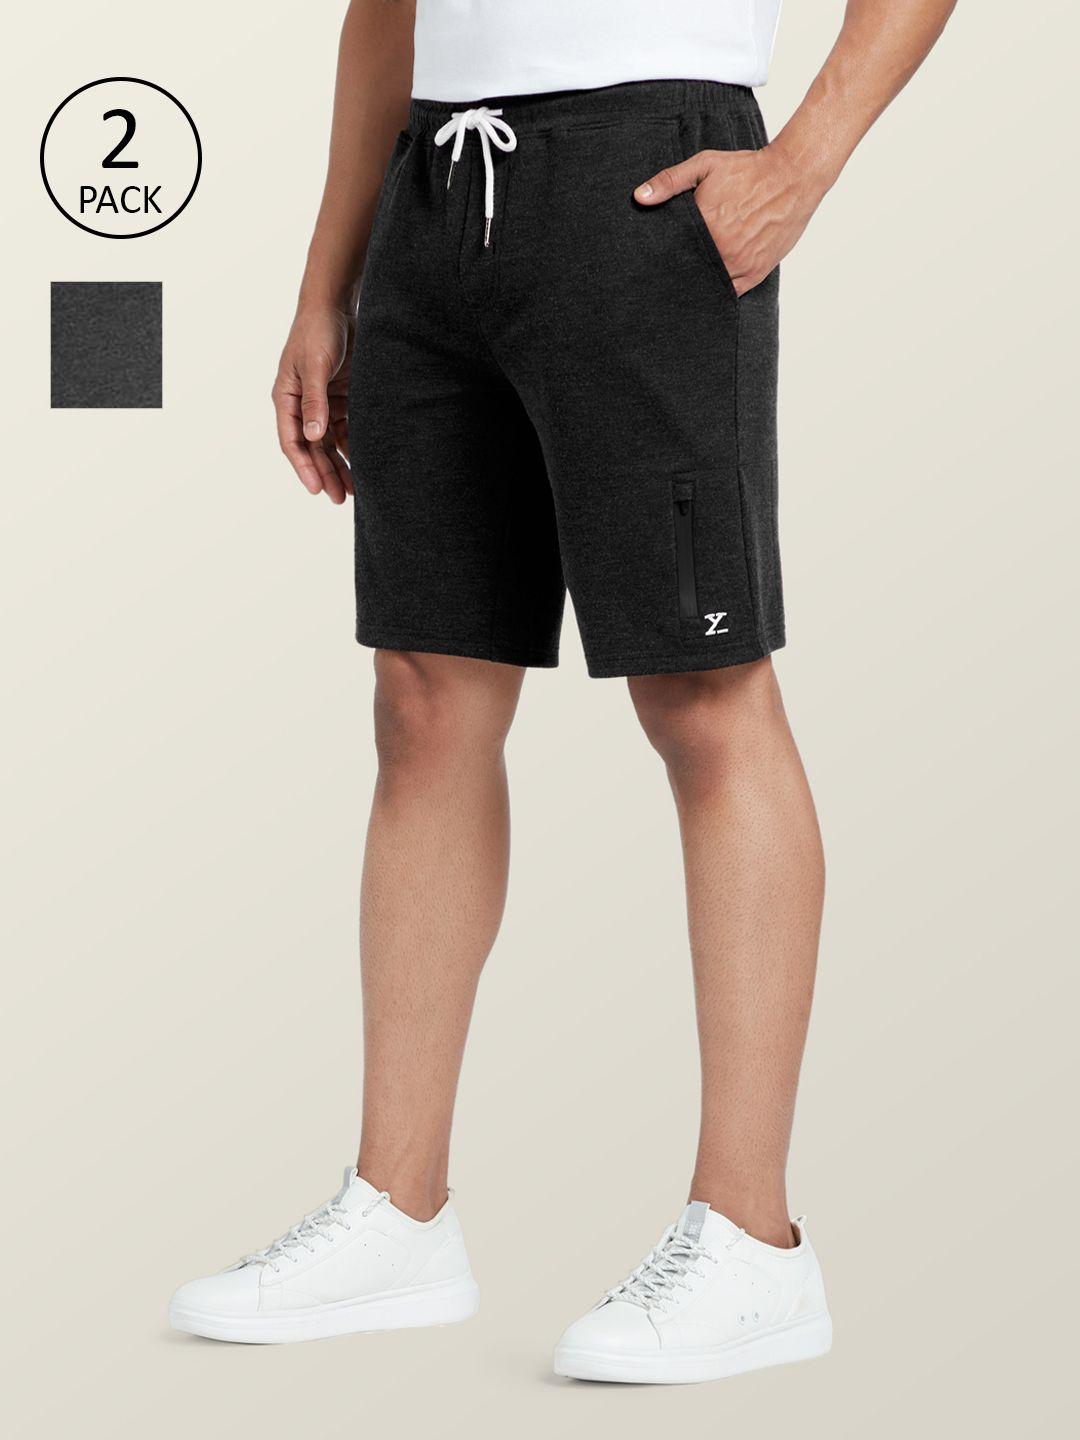 xyxx men black outdoor sports shorts with antimicrobial technology